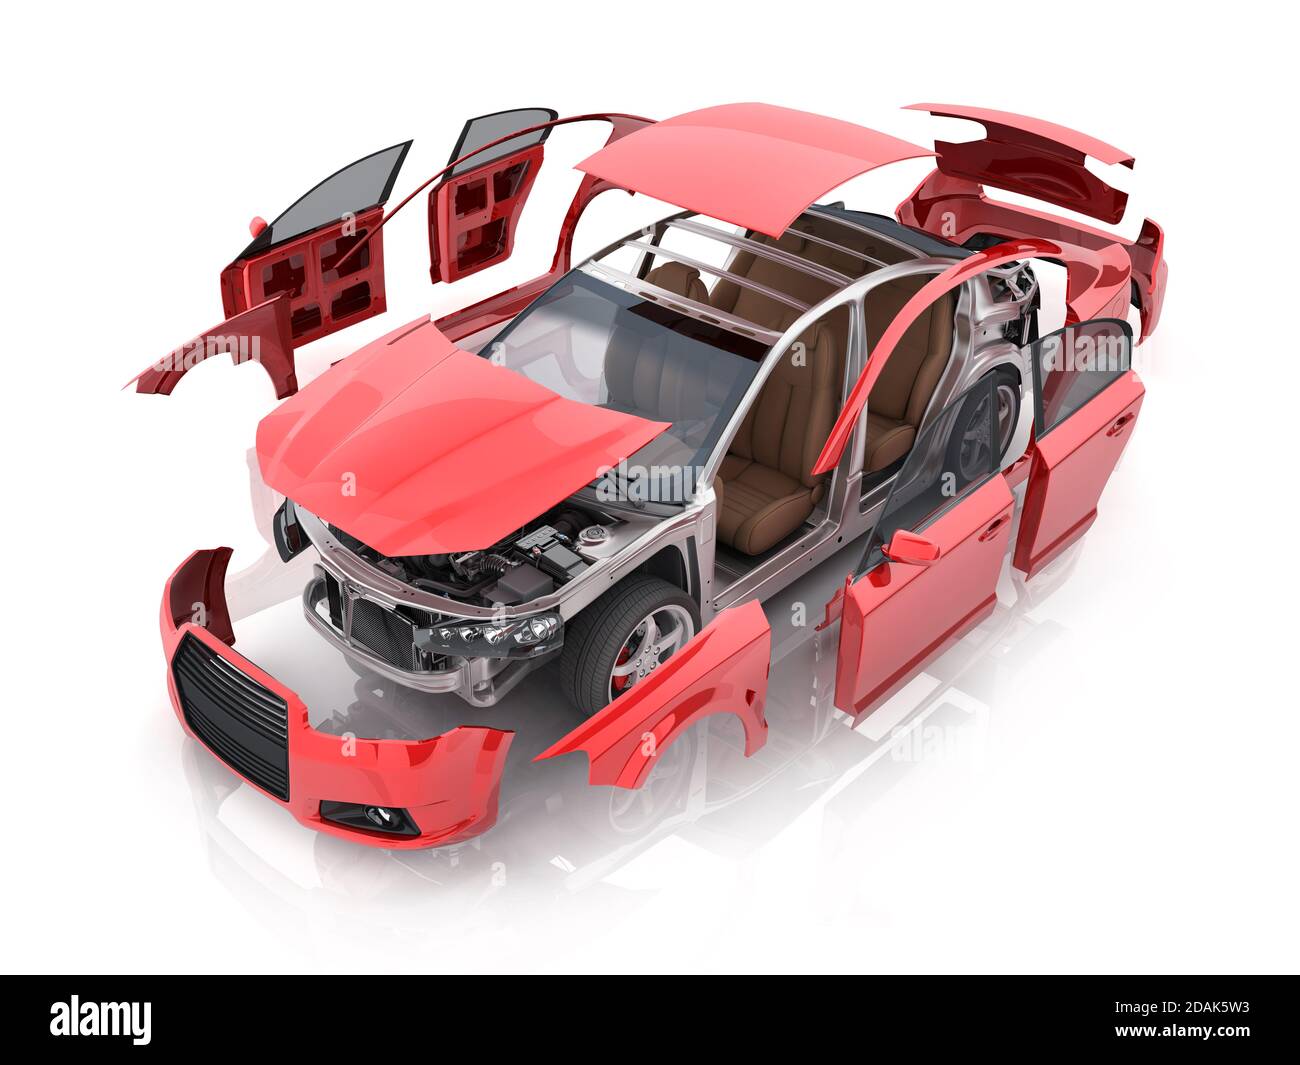 Red body car and interior parts on white background. 3d illustration Stock  Photo - Alamy